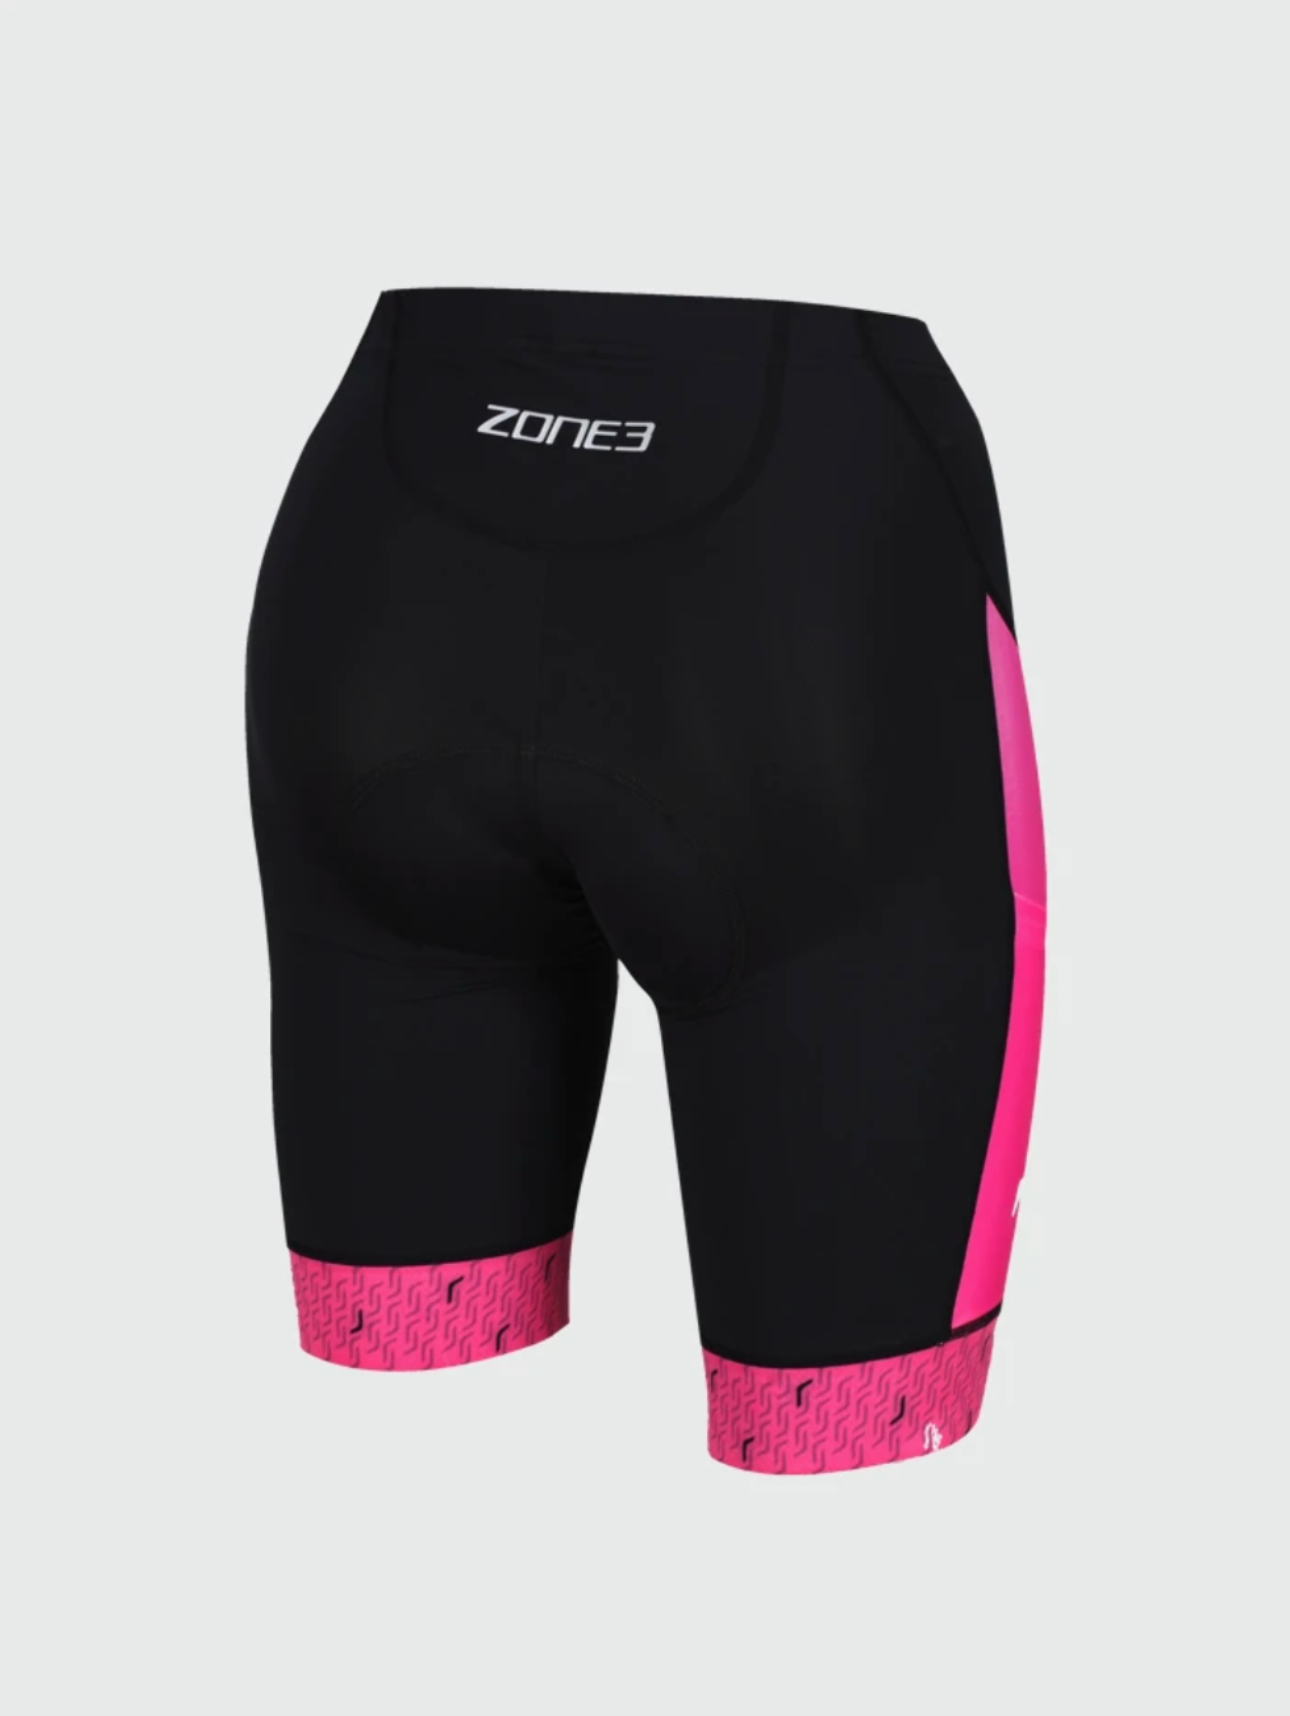 Zone3 Women’s Performance Culture Cycling Shorts